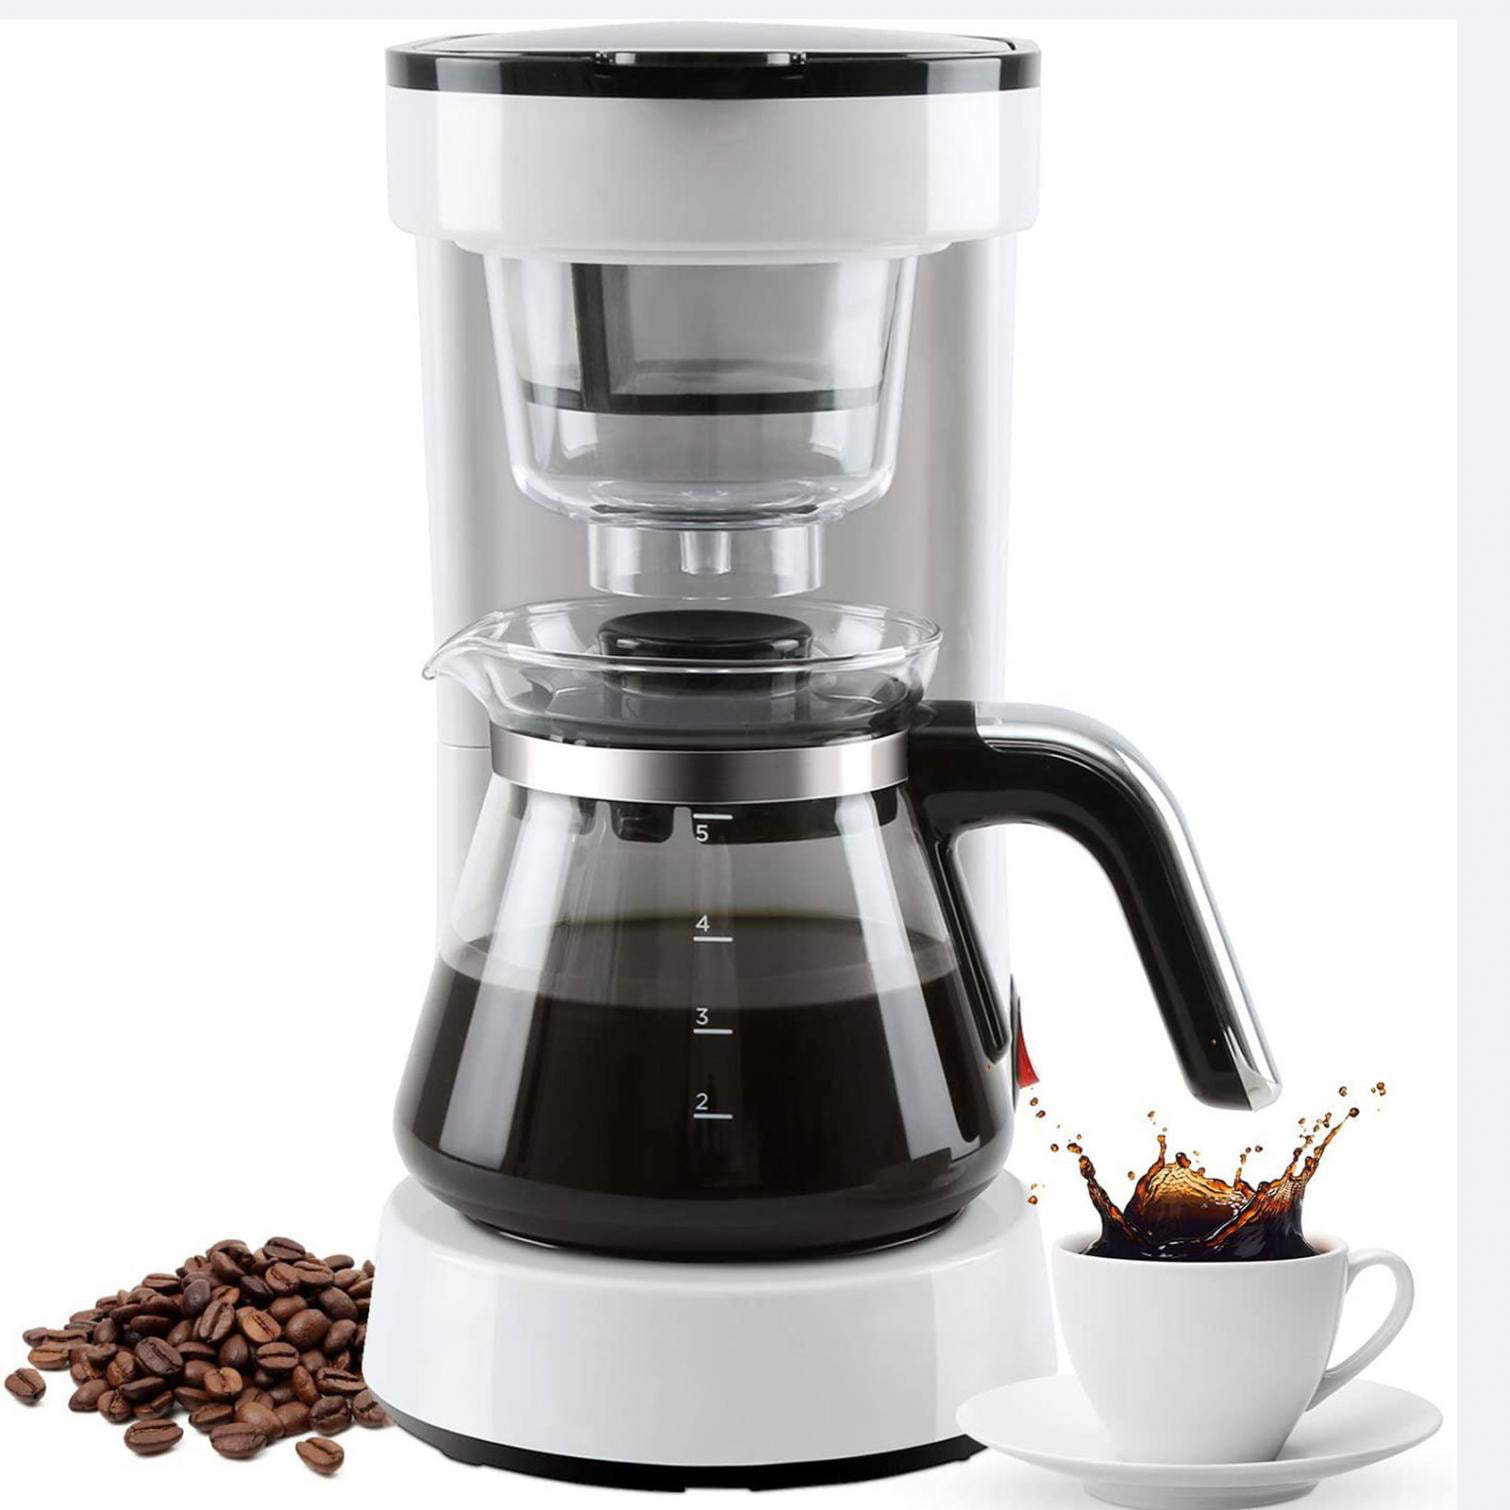 Coffeemaker Stainless Steel Carafe Automatic Shutoff Compact Design Small 4-Cup 